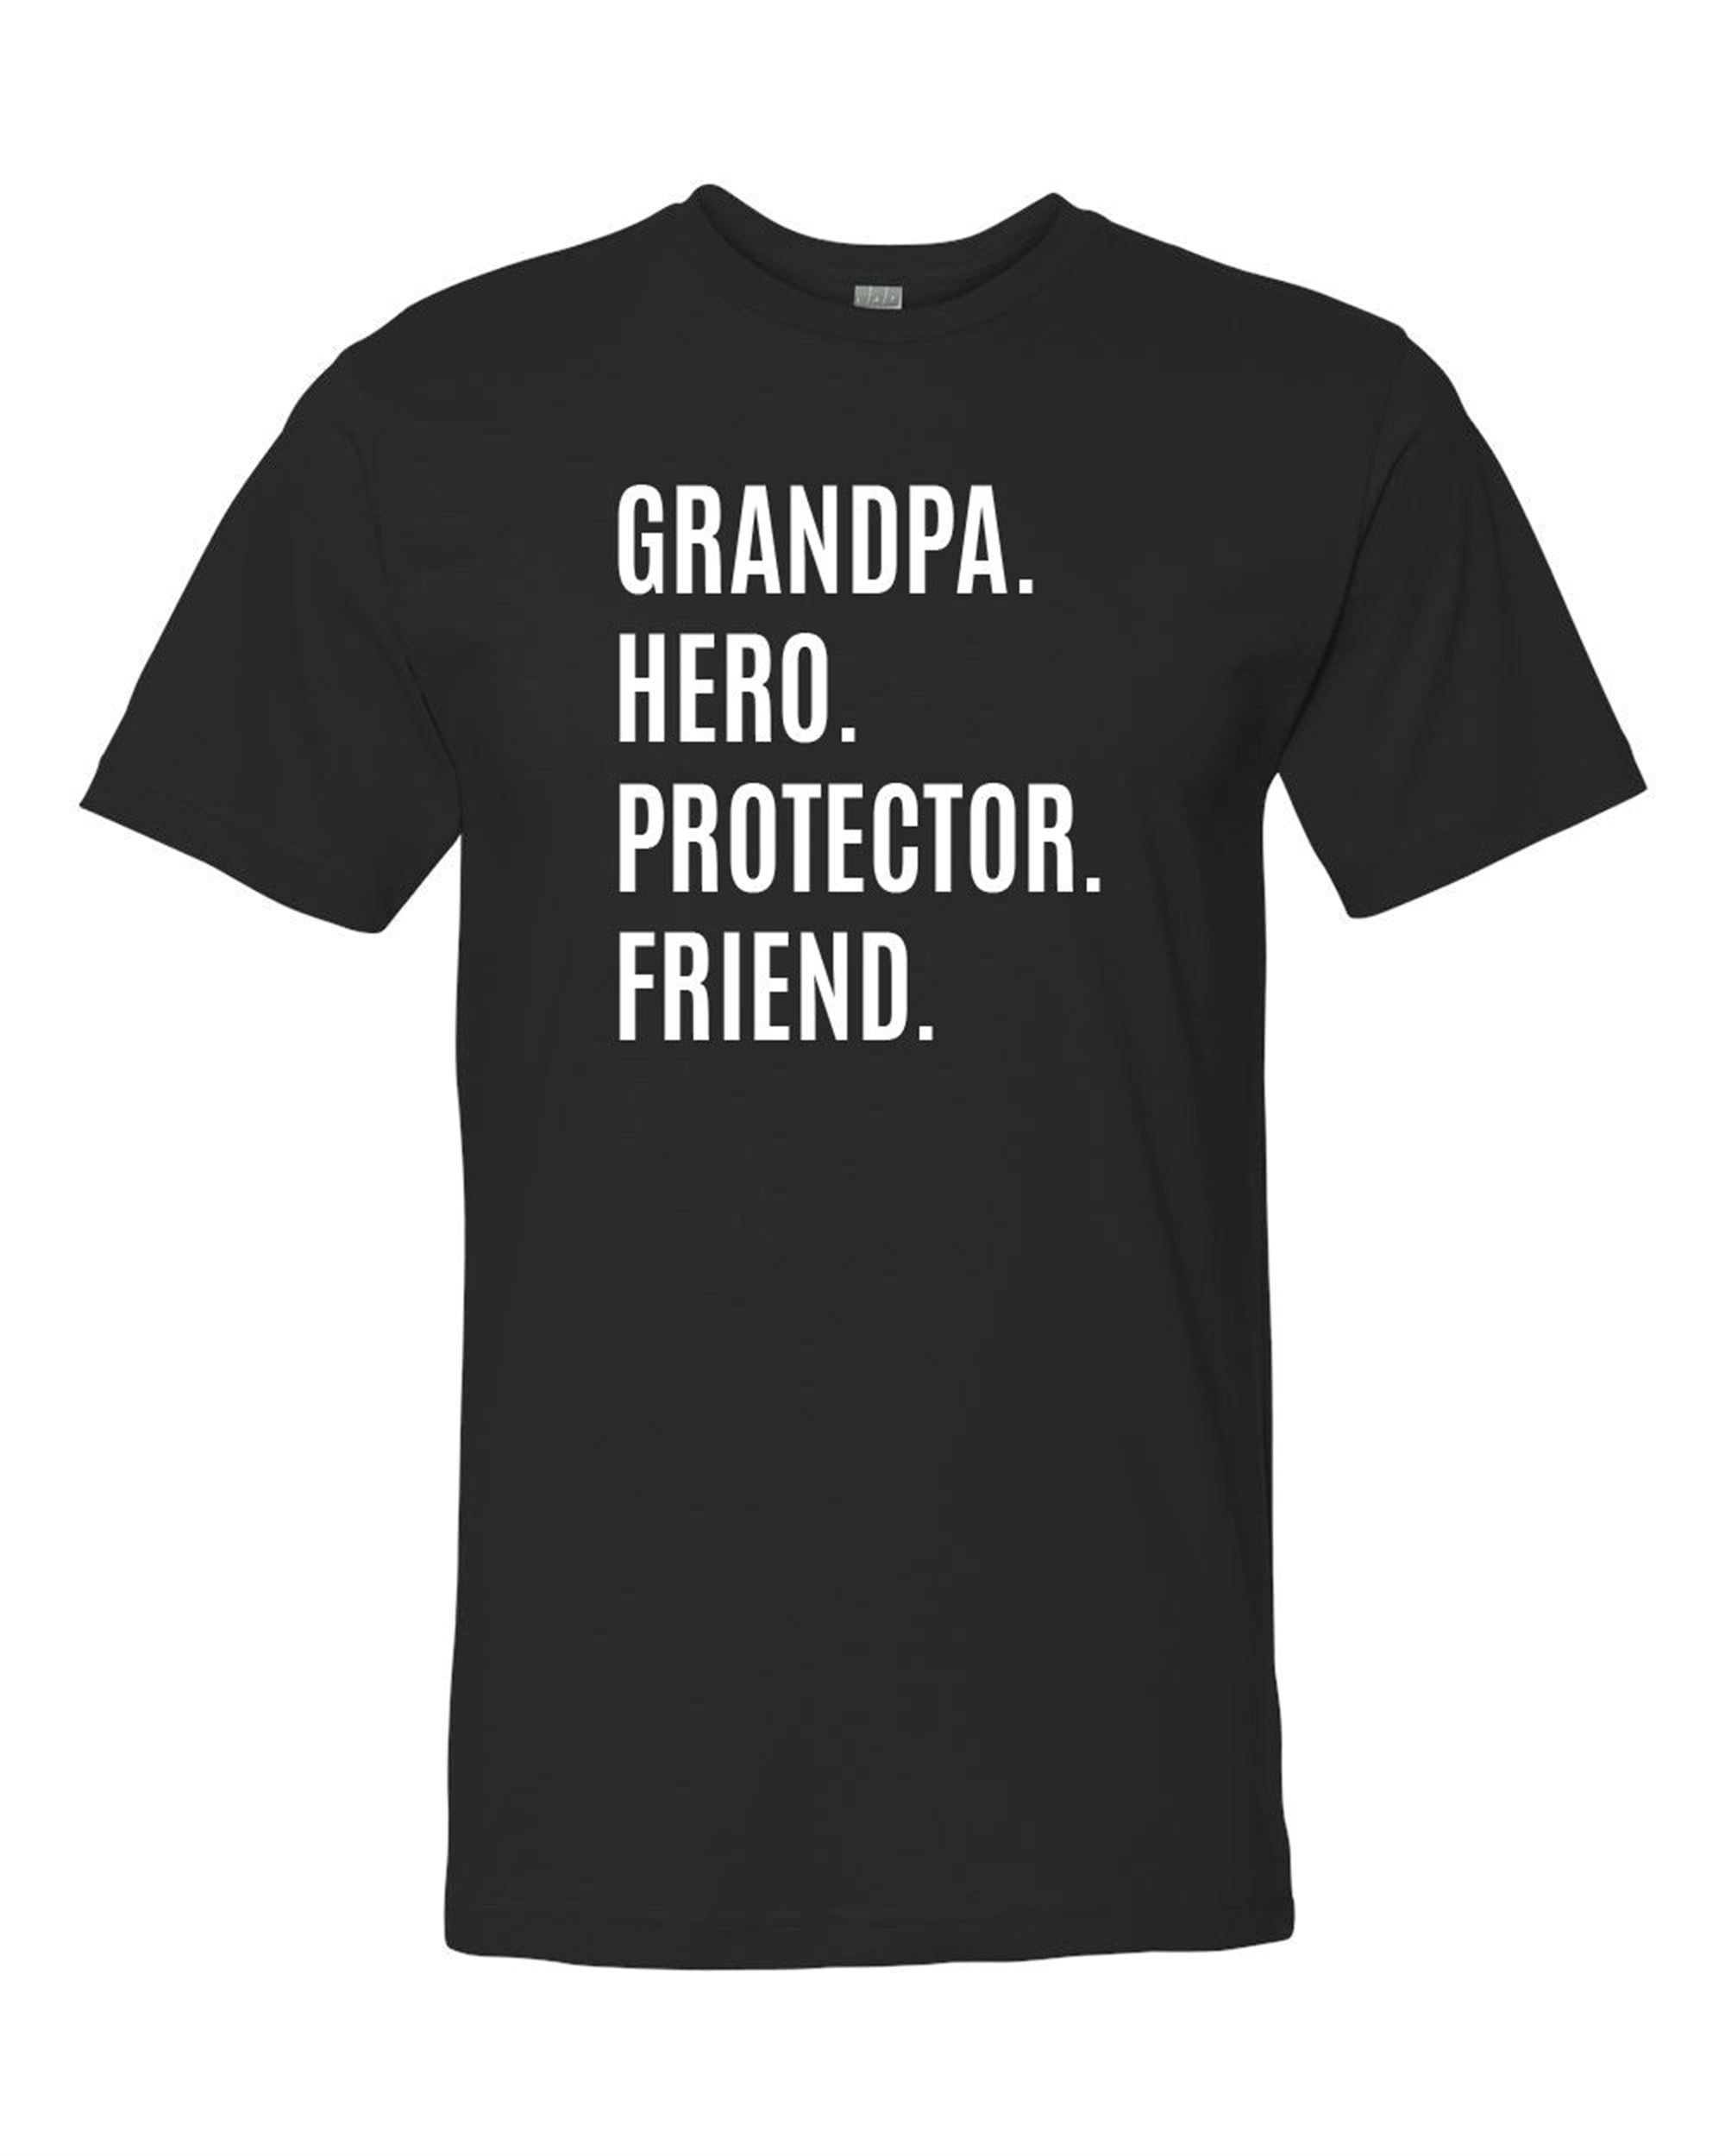 Promotions Grandpa Hero Protector Friend - Unisex Shirt - Father's Day Gifts - Shirts For Grandpa - Gifts For Grandpa - Pregnancy Reveal Gift 